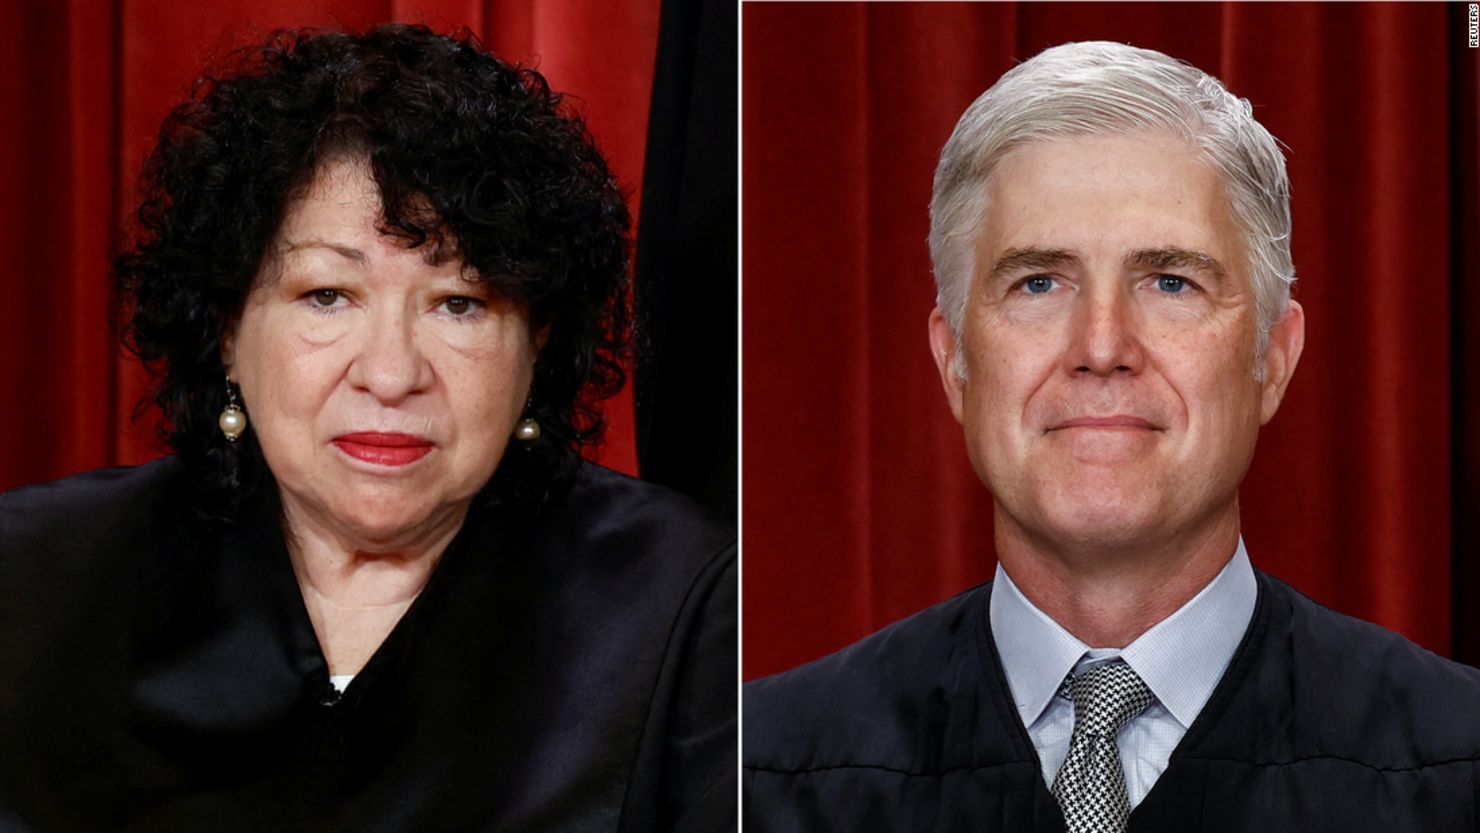 U.S. Supreme Court Justices Sonia Sotomayor and Neil Gorsuch.